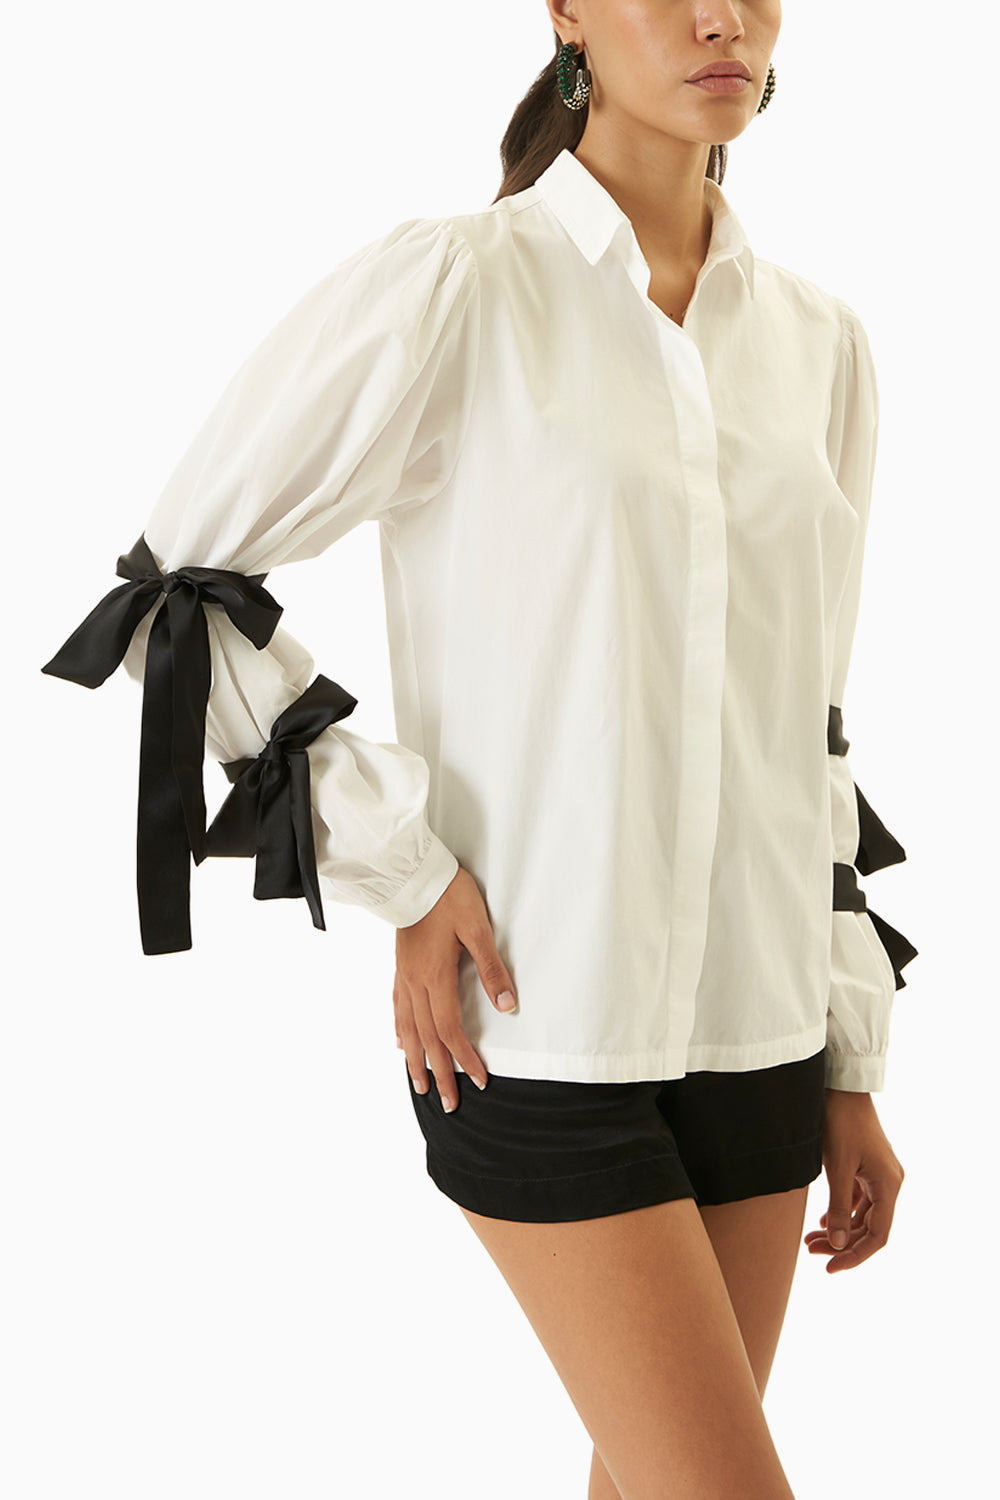 Contrast White Sleeve Tie Shirt